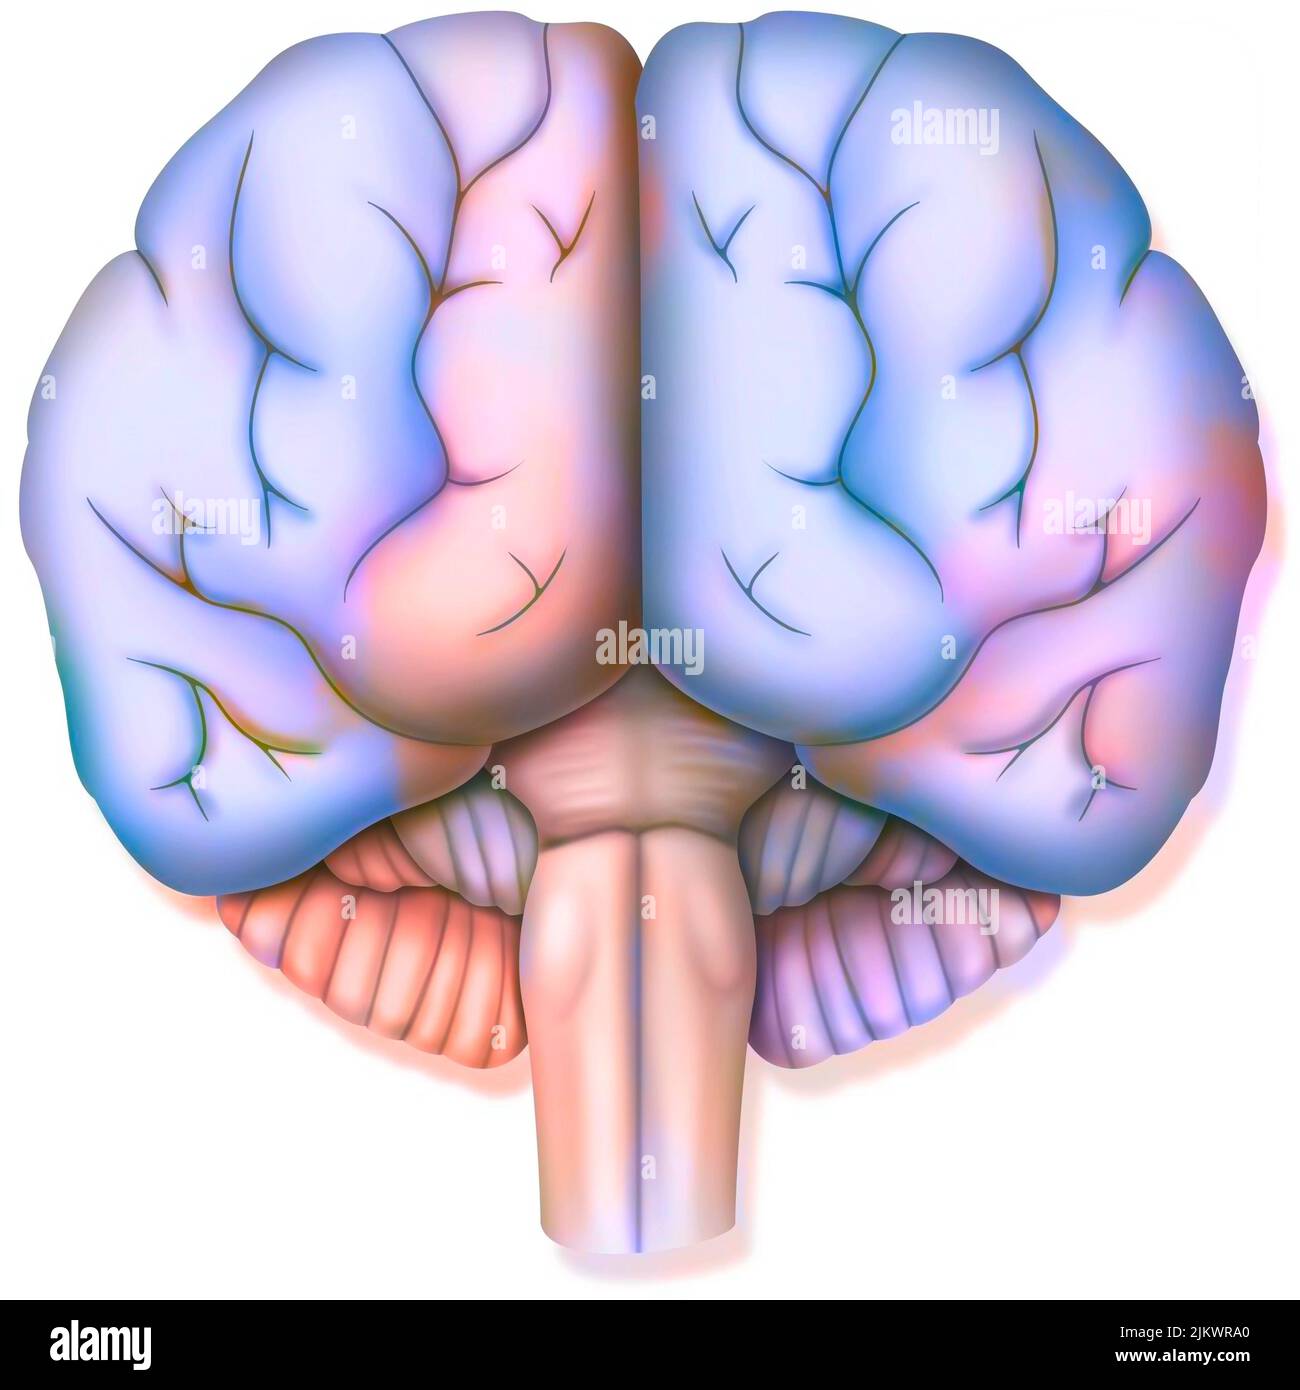 Brain, with the two cerebral hemispheres, the cerebellum and the brainstem. Stock Photo